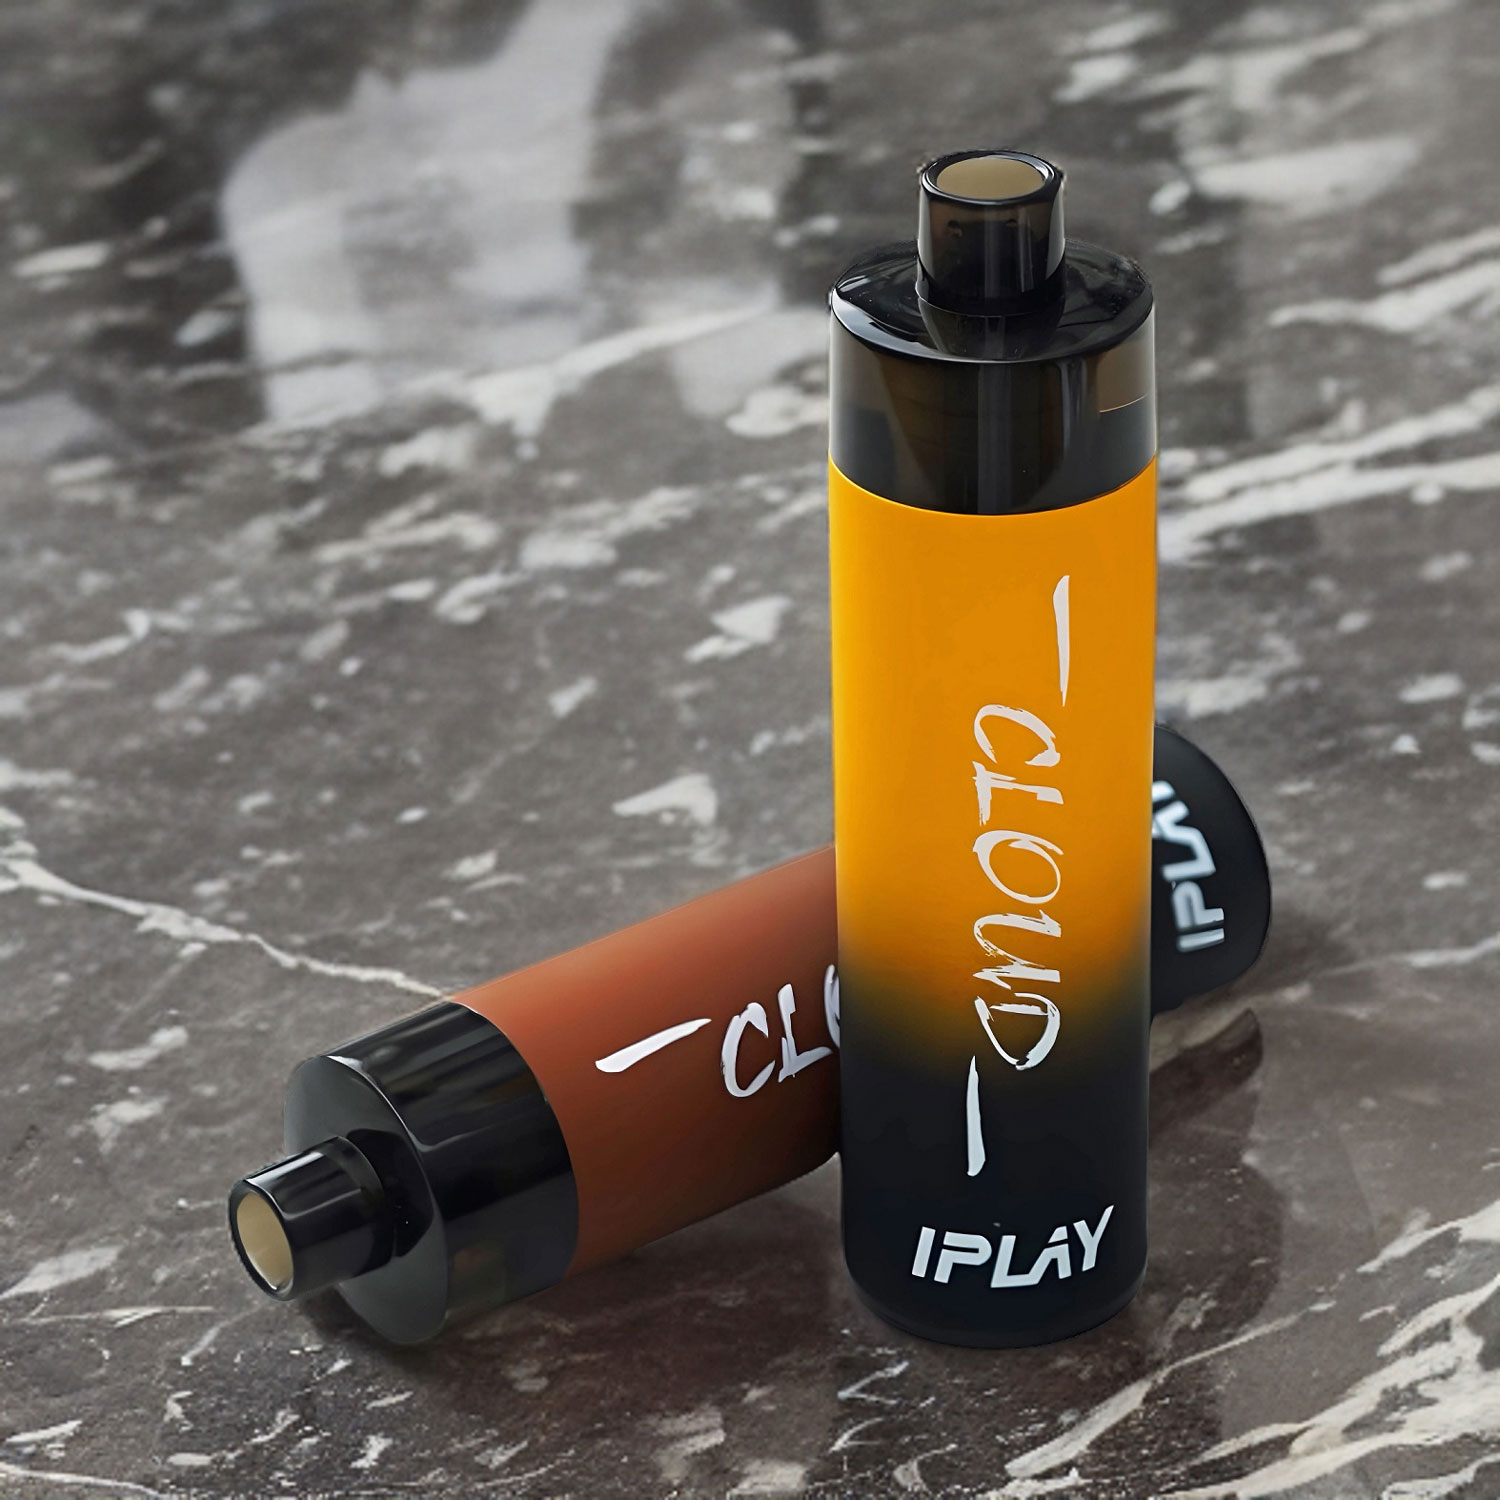 IPlay Cloud Disposable 10000 Puffs